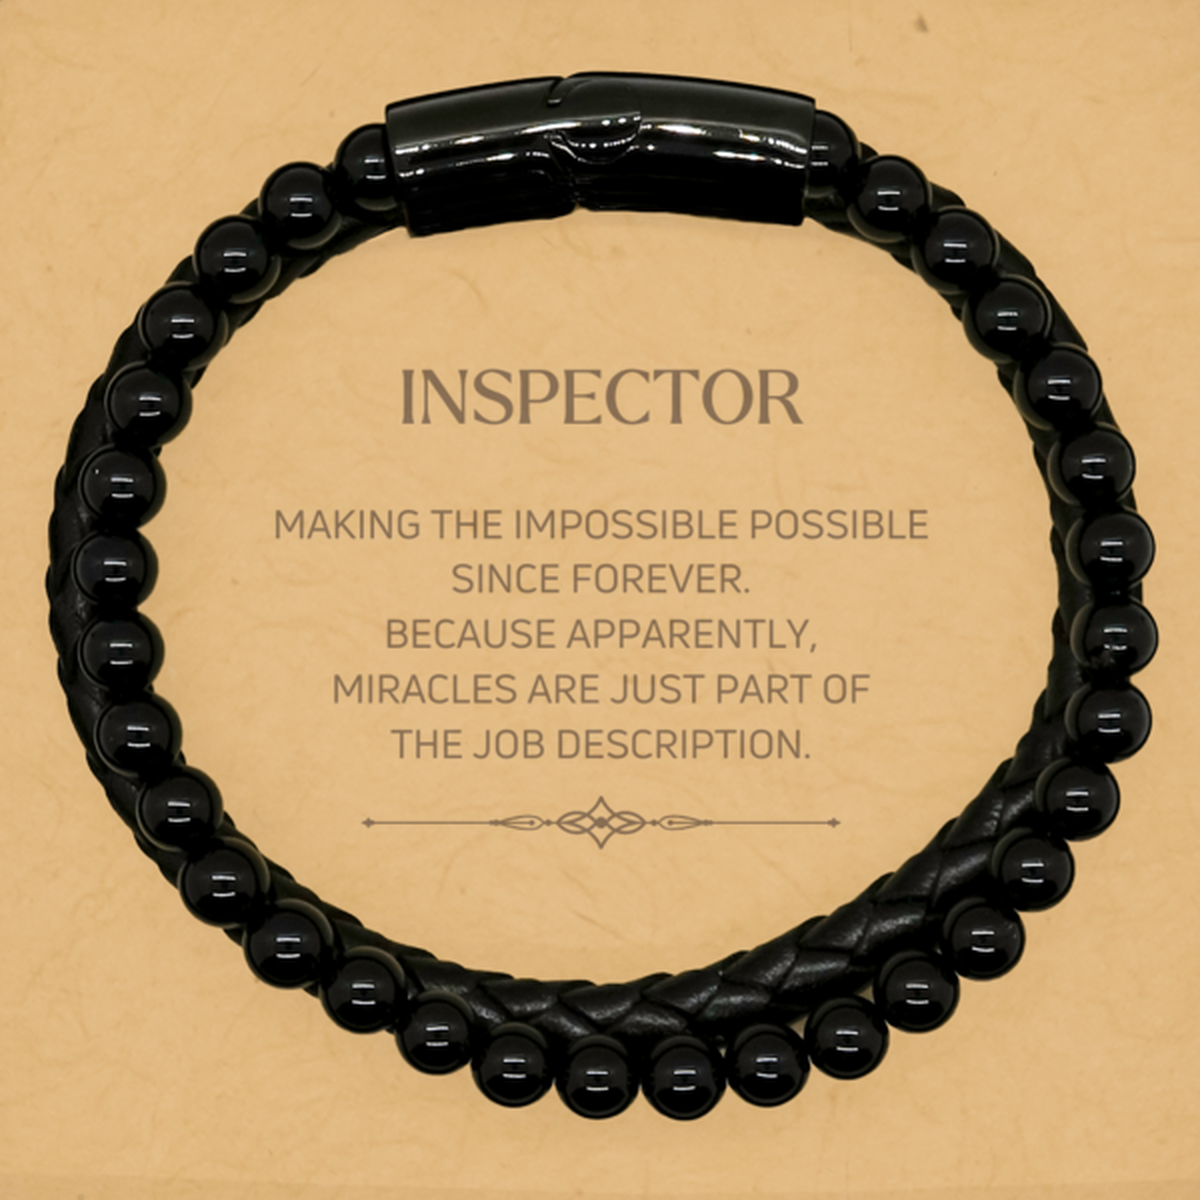 Funny Inspector Gifts, Miracles are just part of the job description, Inspirational Birthday Stone Leather Bracelets For Inspector, Men, Women, Coworkers, Friends, Boss